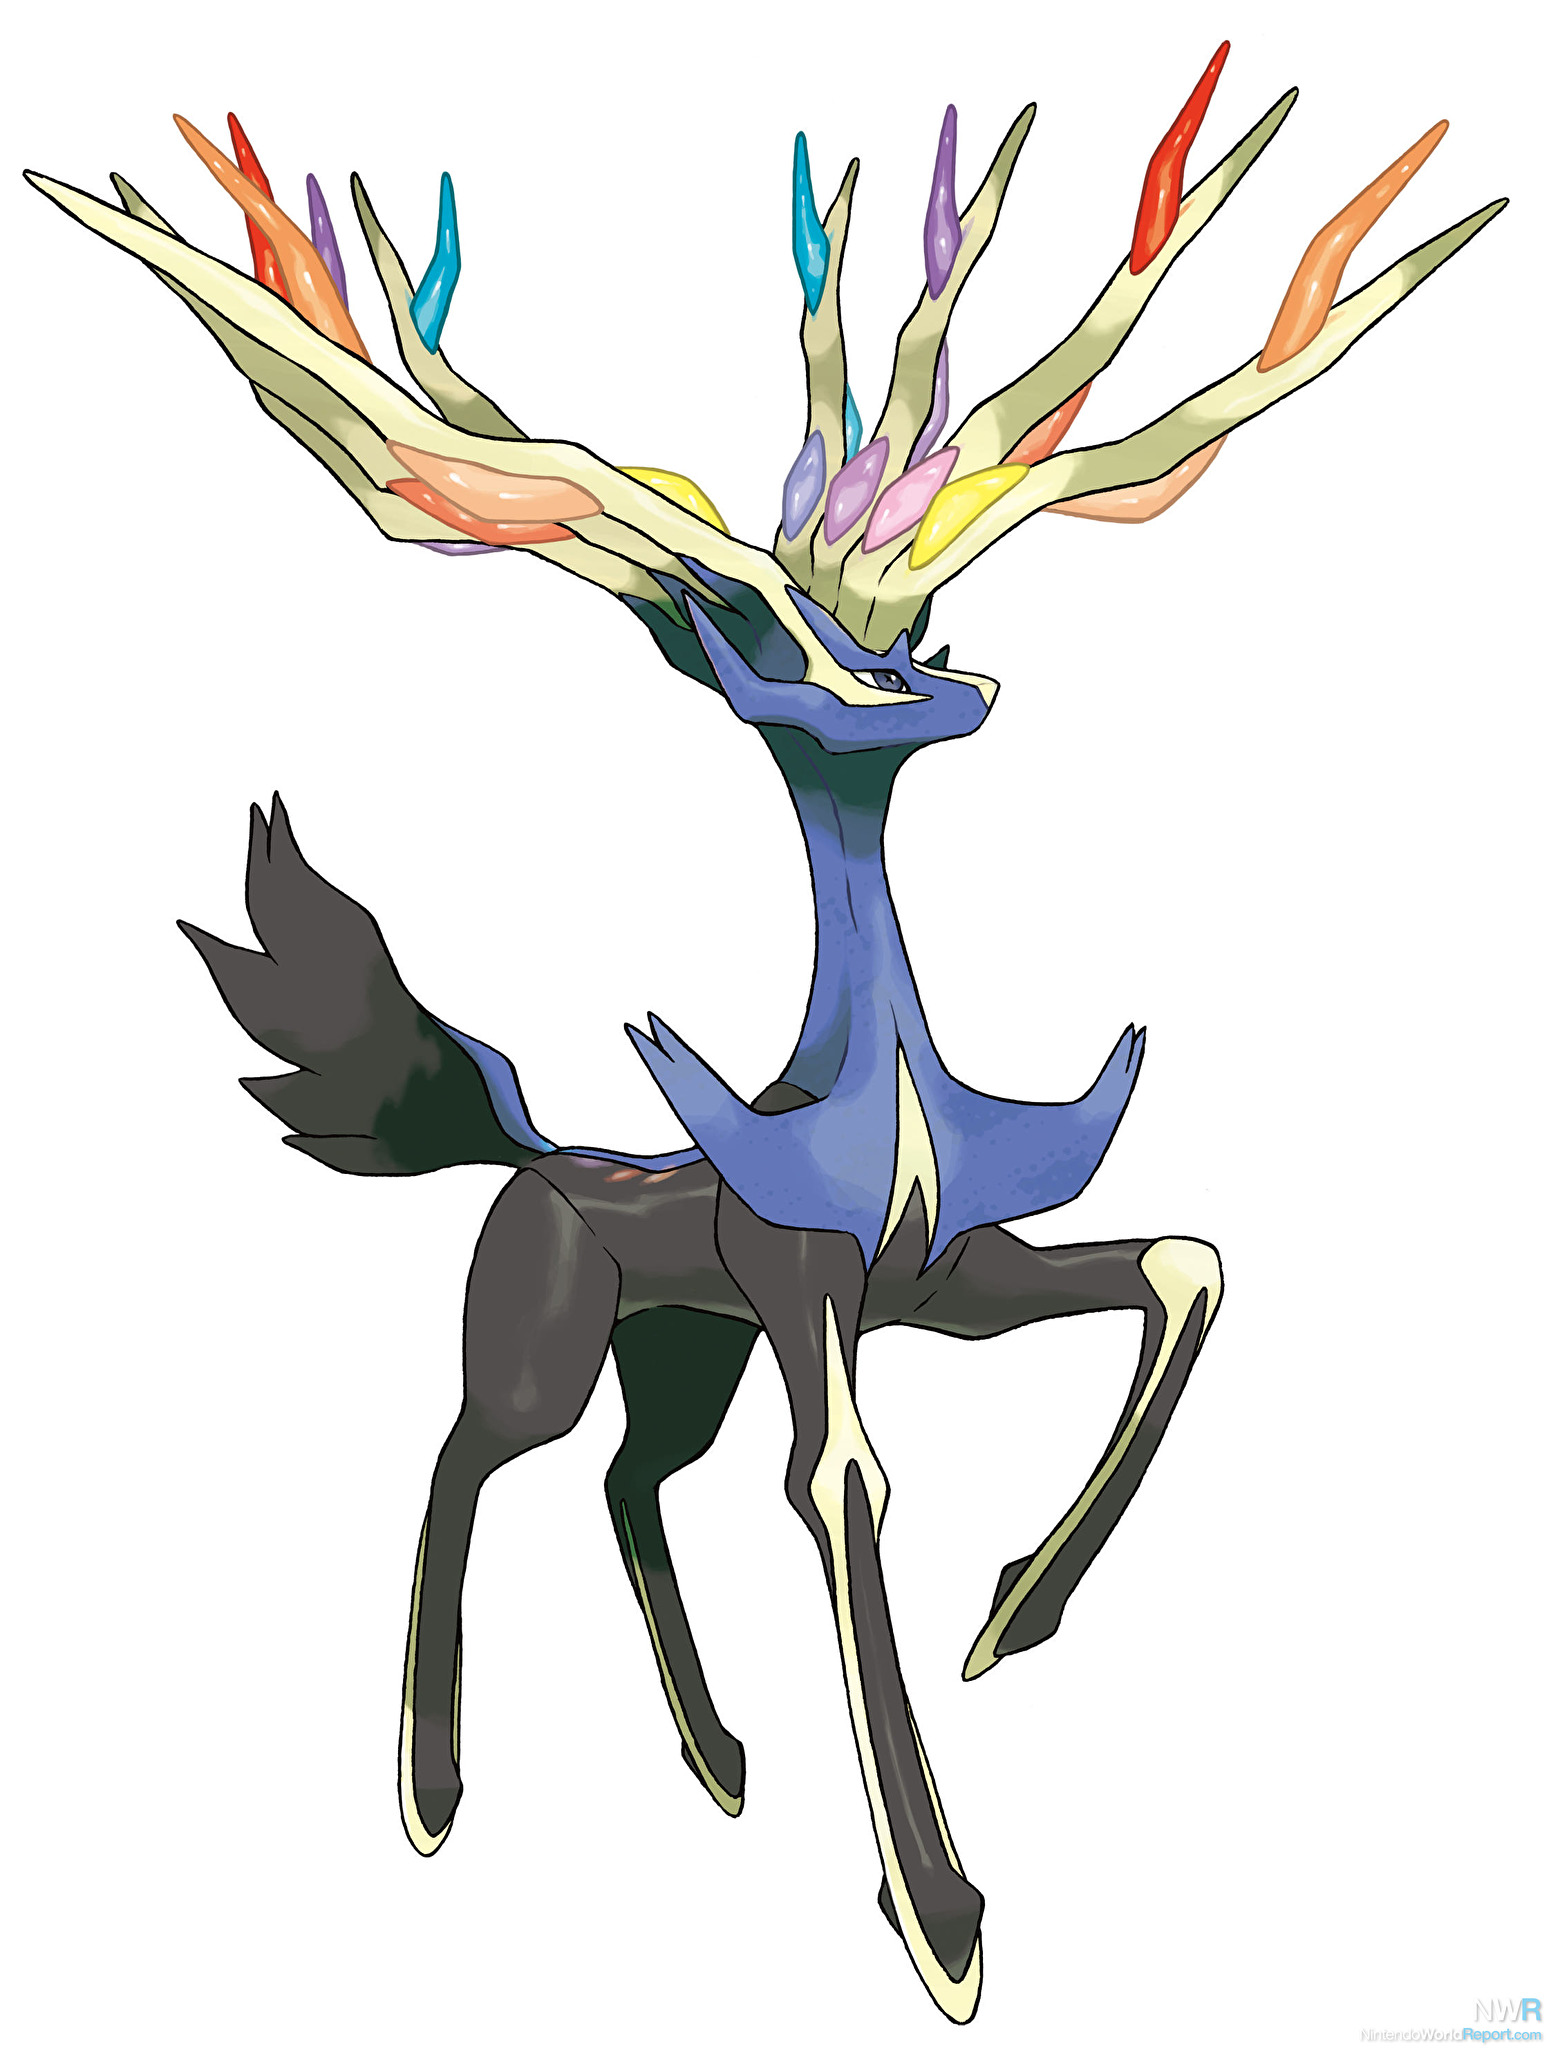 What are some of the Pokemon introduced in the Pokemon X and Y games?